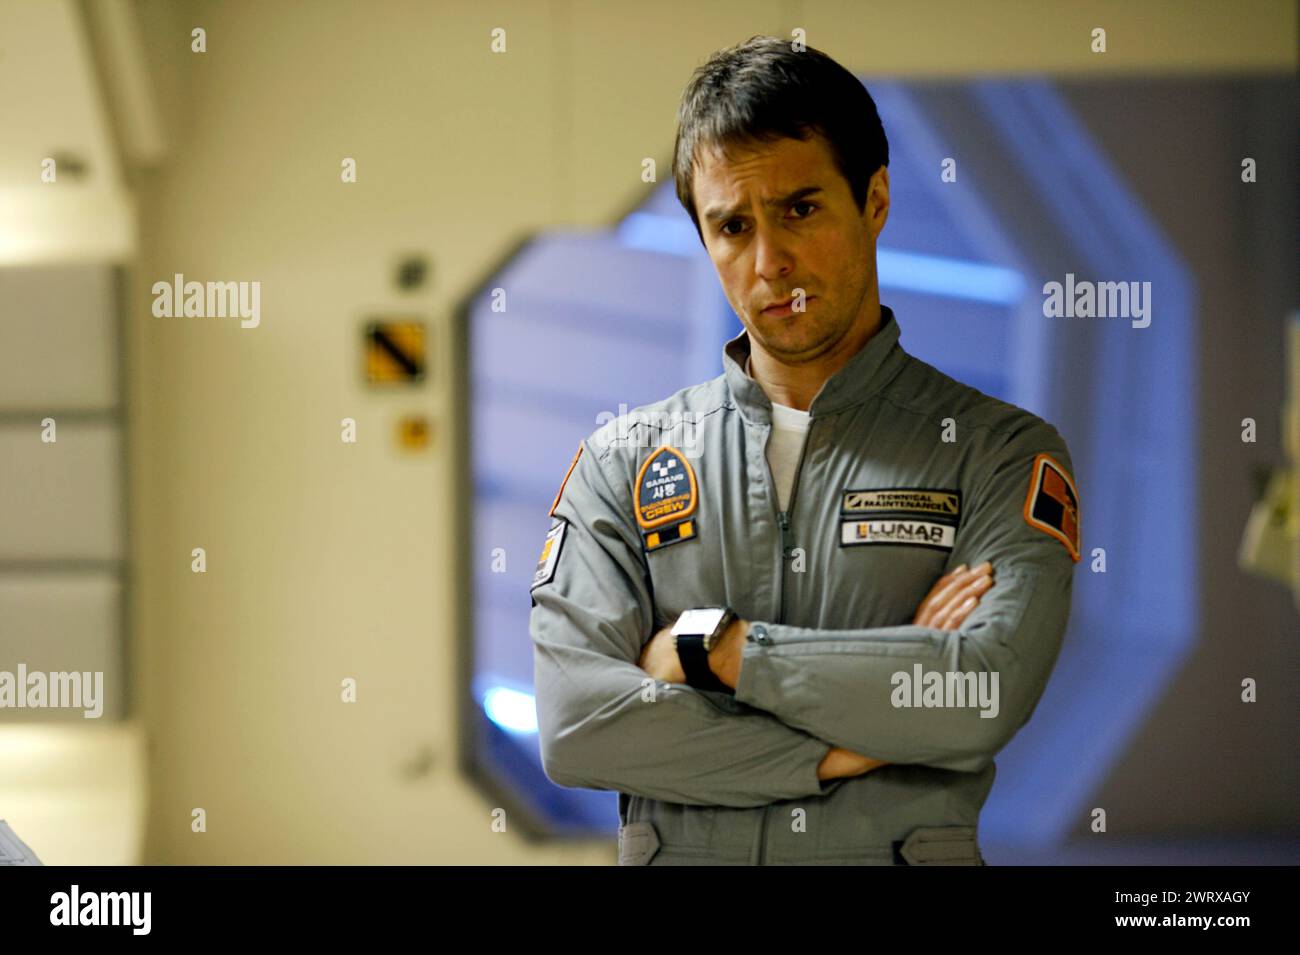 Moon (2009) directed by Duncan Jones and starring Sam Rockwell as an astronaut working on the moon who discovers his retirement may come sooner then planned. Publicity still  ***EDITORIAL USE ONLY***. Credit: BFA / Sony Pictures Classics Stock Photo